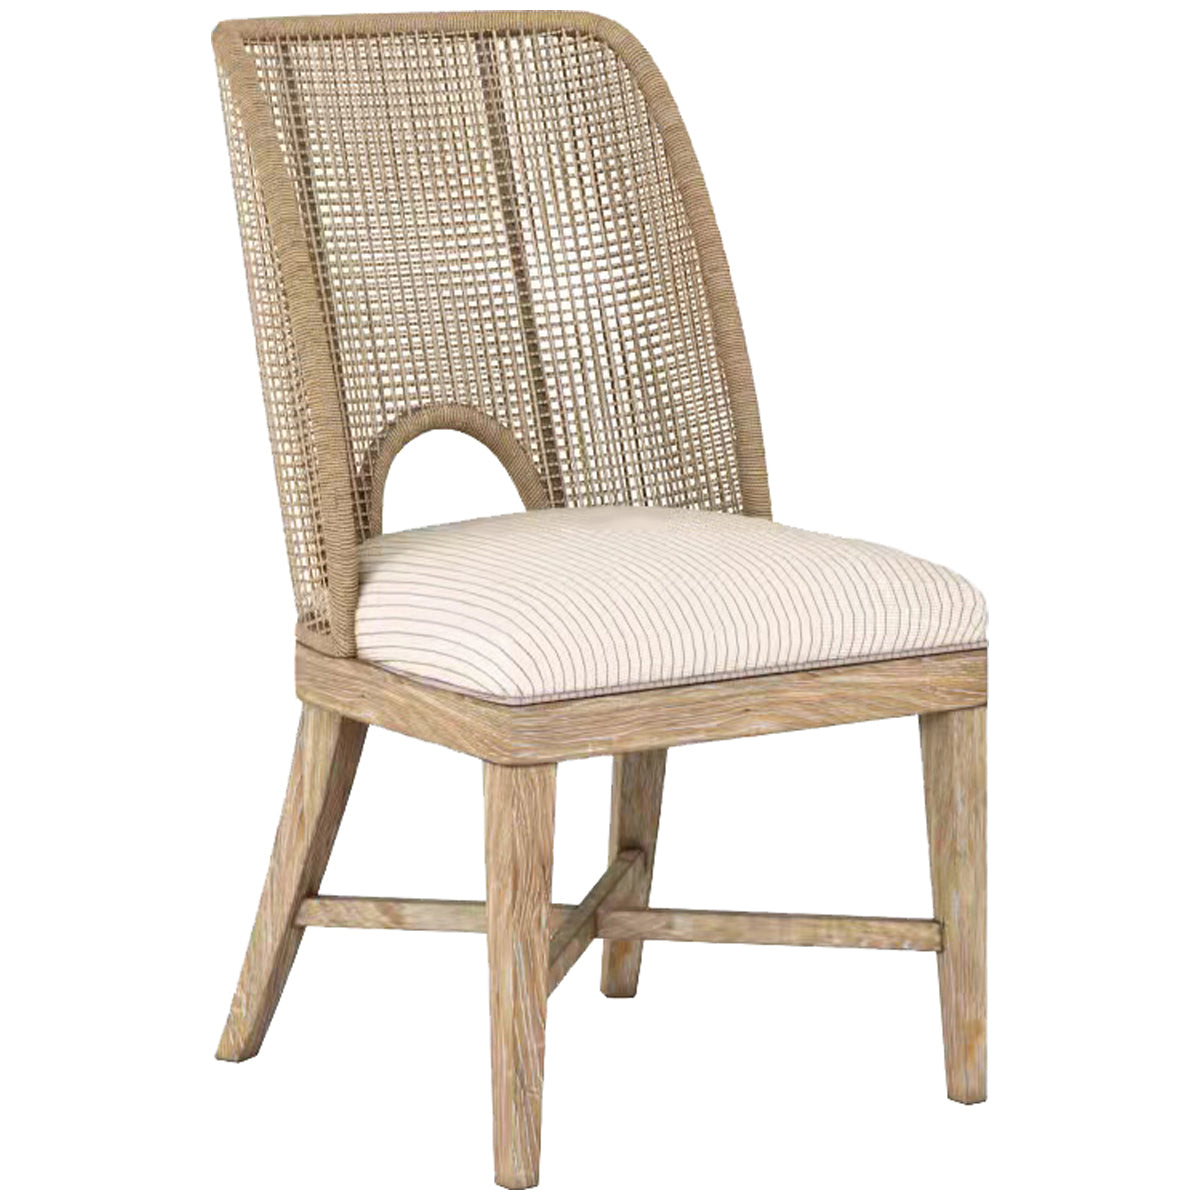 A.R.T. Furniture Frame Woven Sling Chair, Set of 2